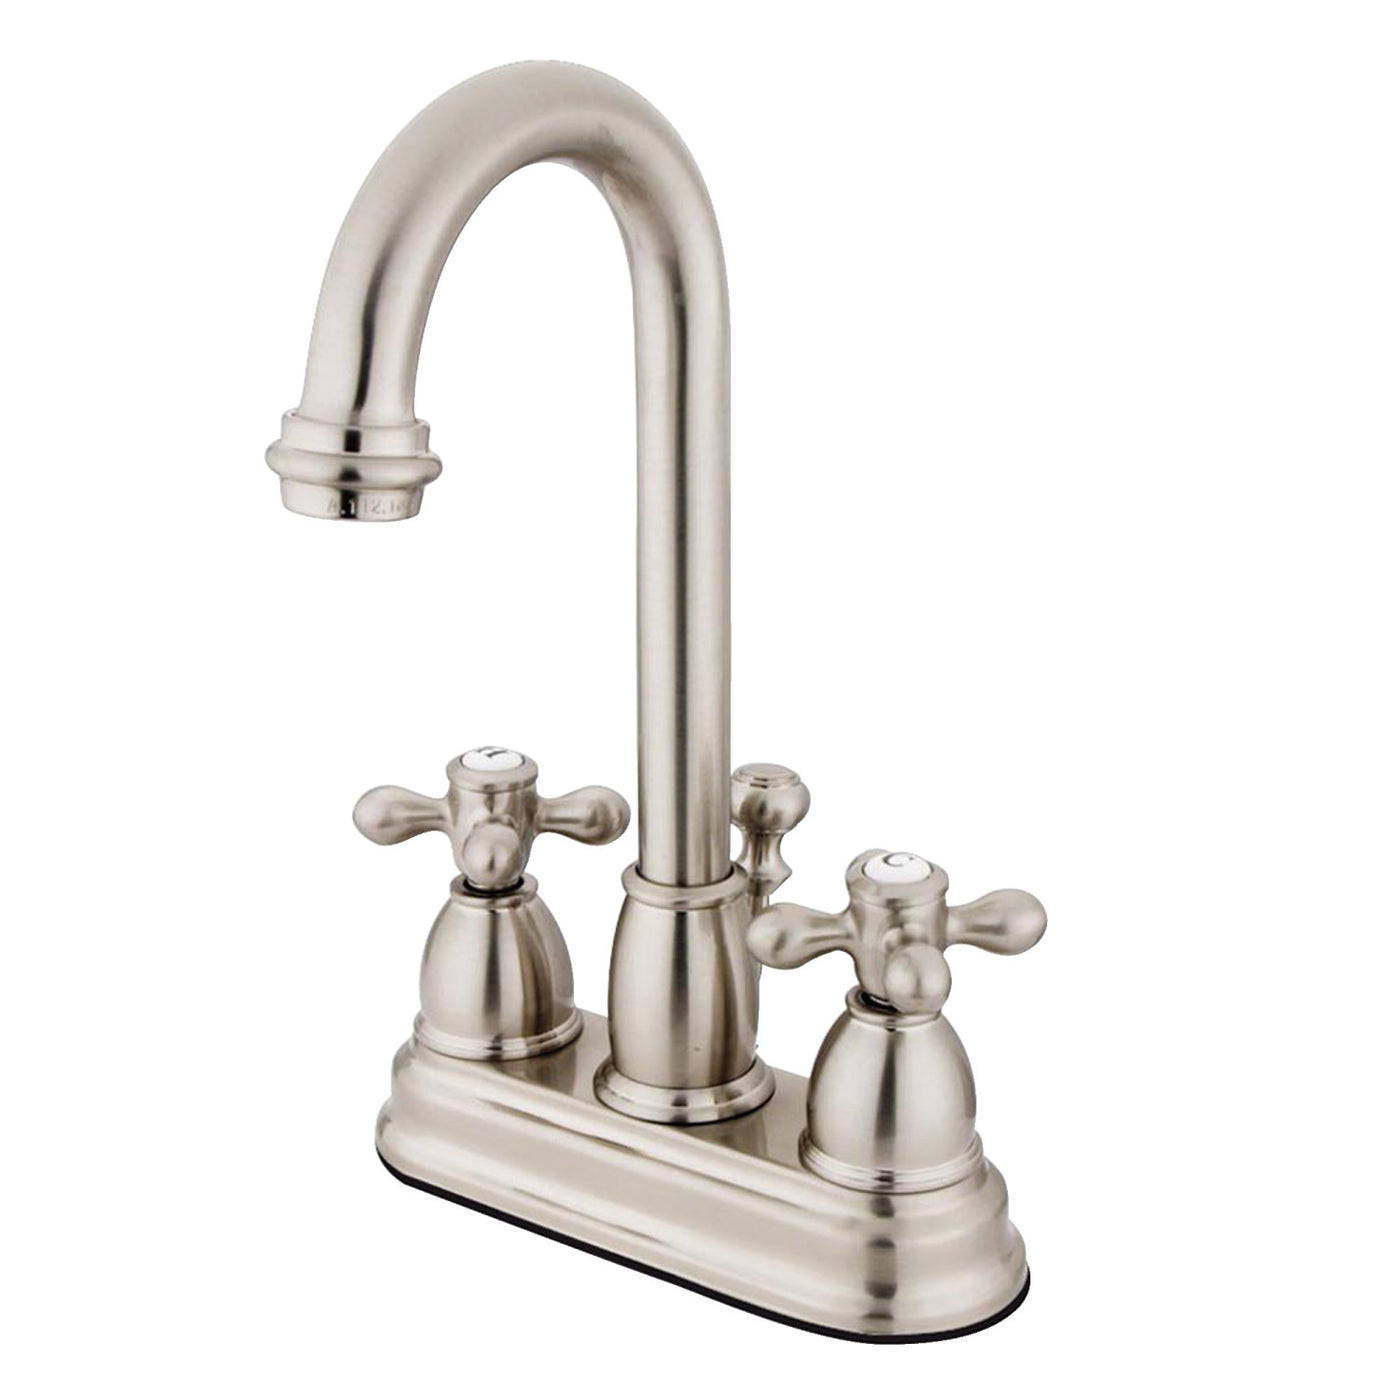 Elements of Design EB3618AX 4-Inch Centerset Bathroom Faucet, Brushed Nickel